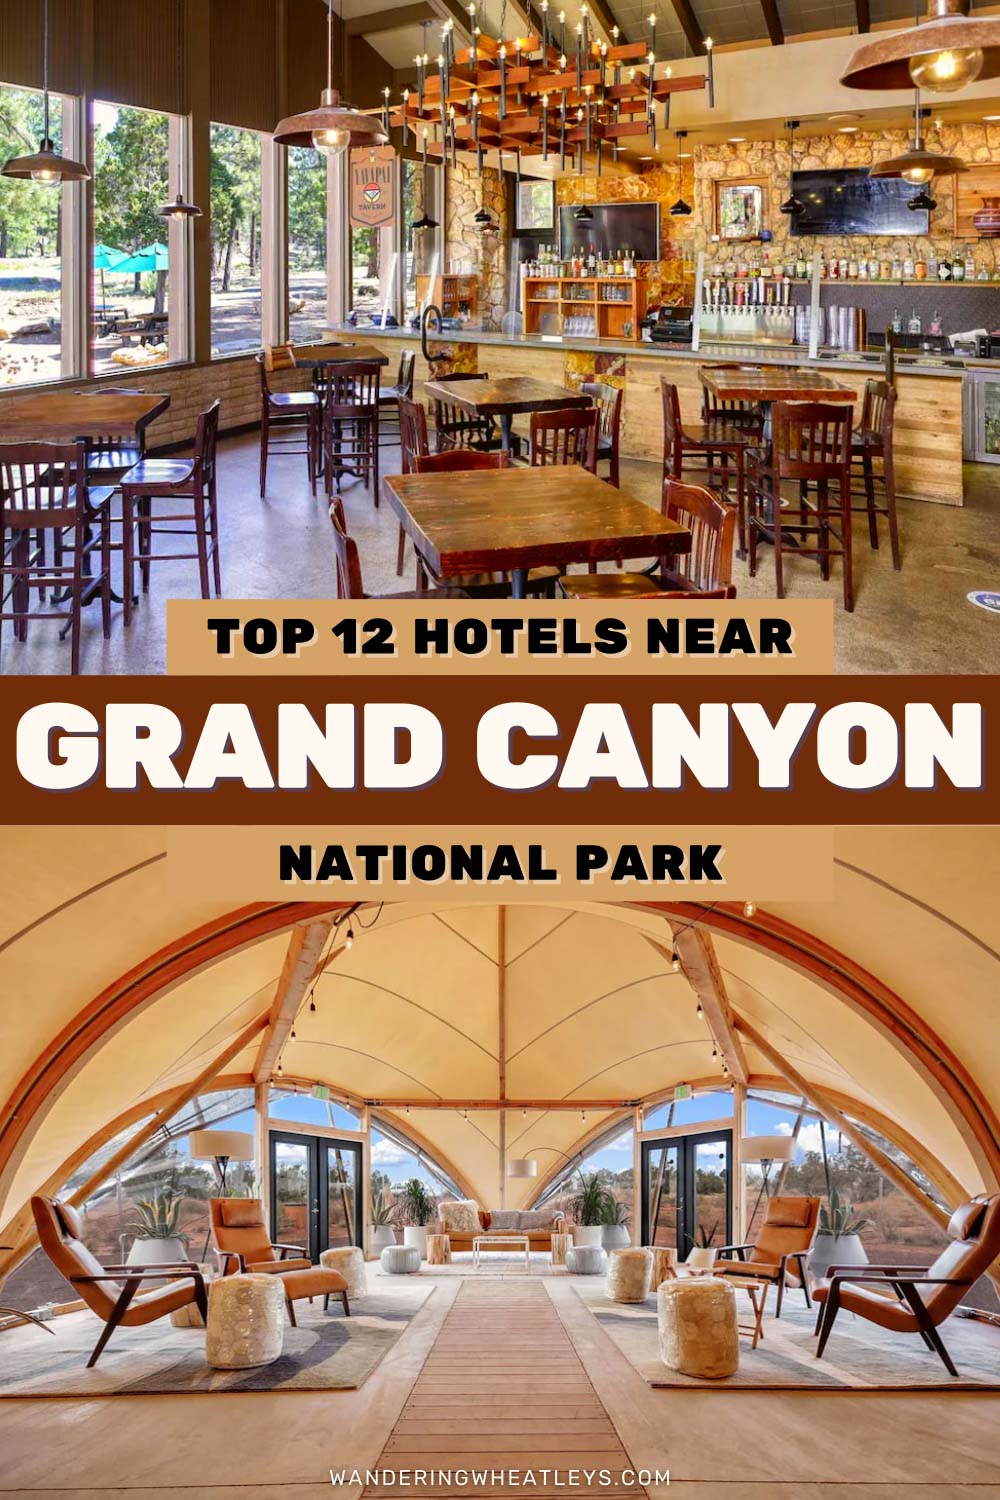 The Best Hotels near Grand Canyon National Park